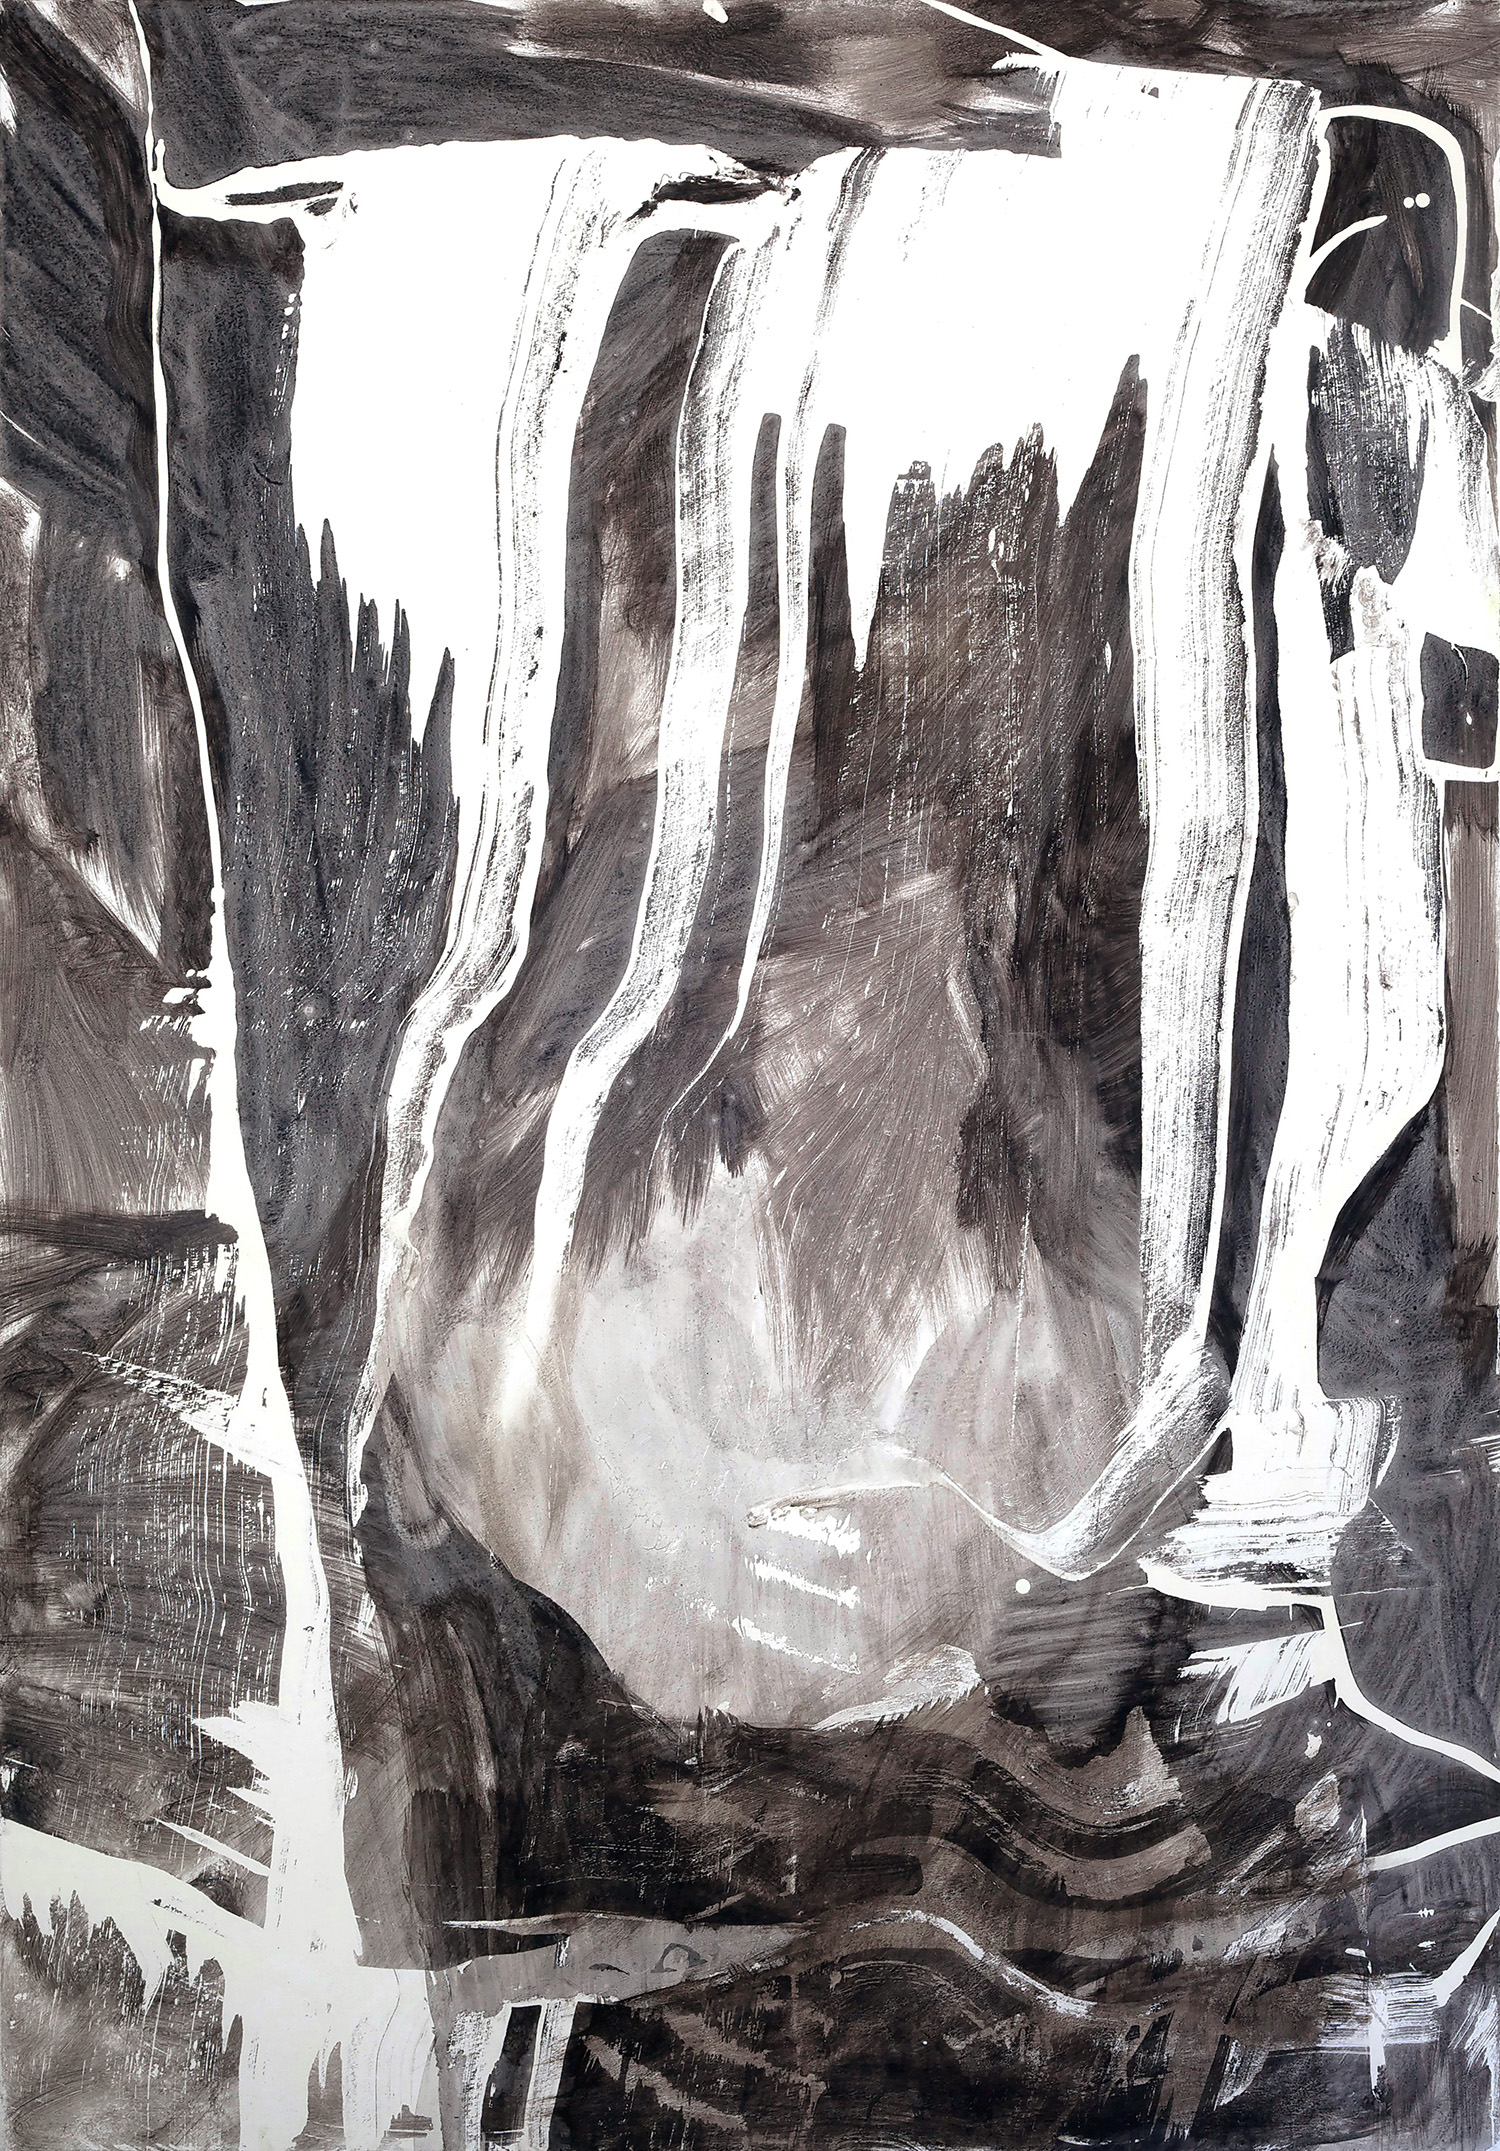   Falls (Anthracite) , 2012, acrylic on canvas, 60 x 42 inches 